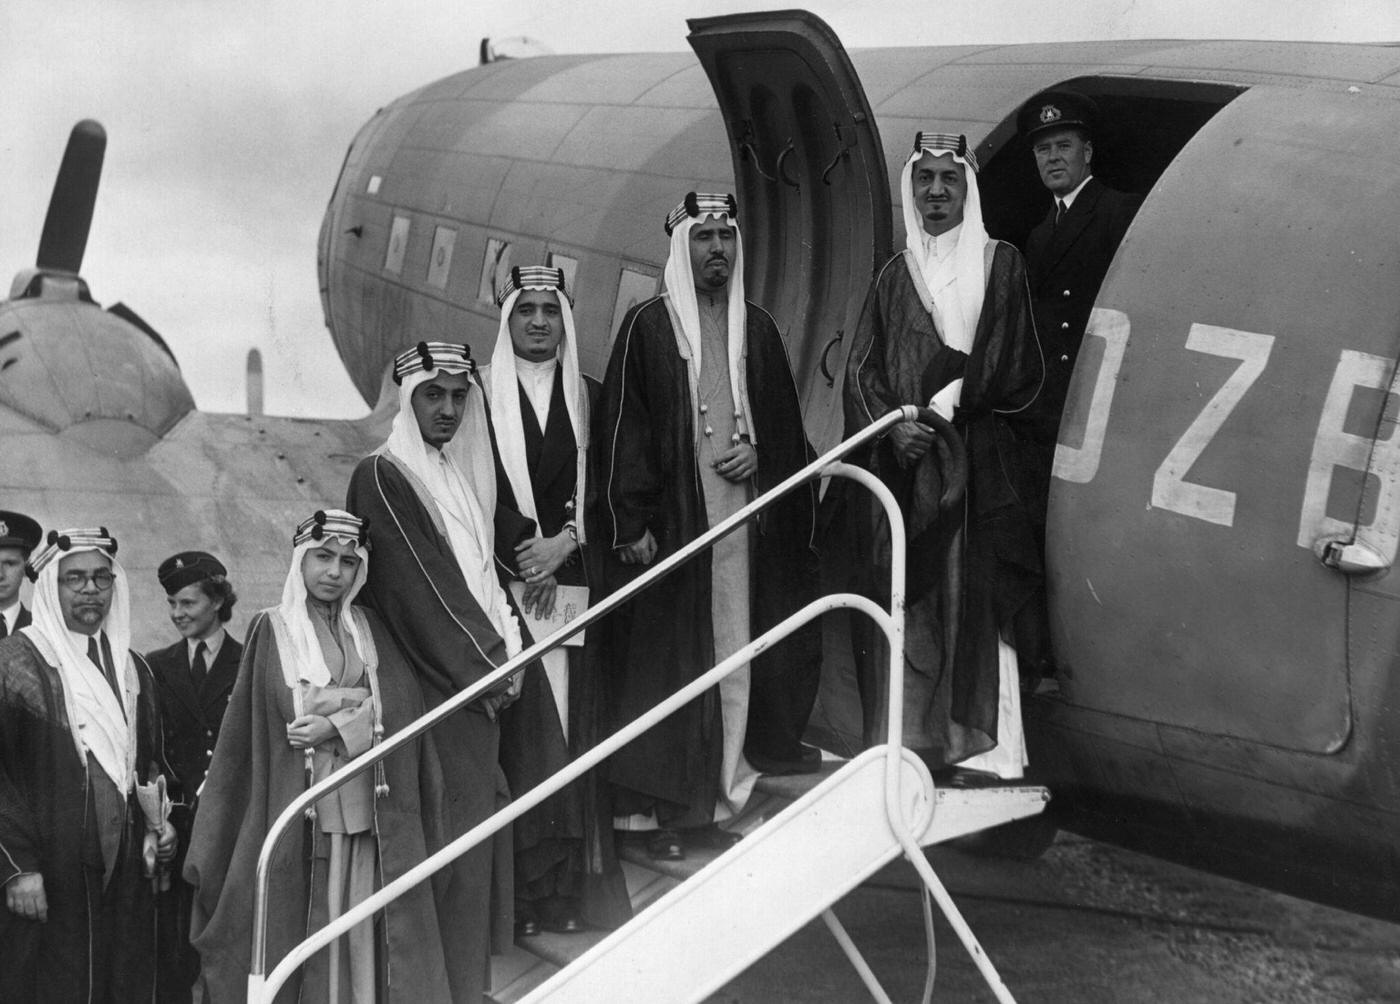 Five sons of King Abdul Aziz Ibn Saud of Saudi Arabia are shown boarding a plane at Herne Airport in Hampshire.